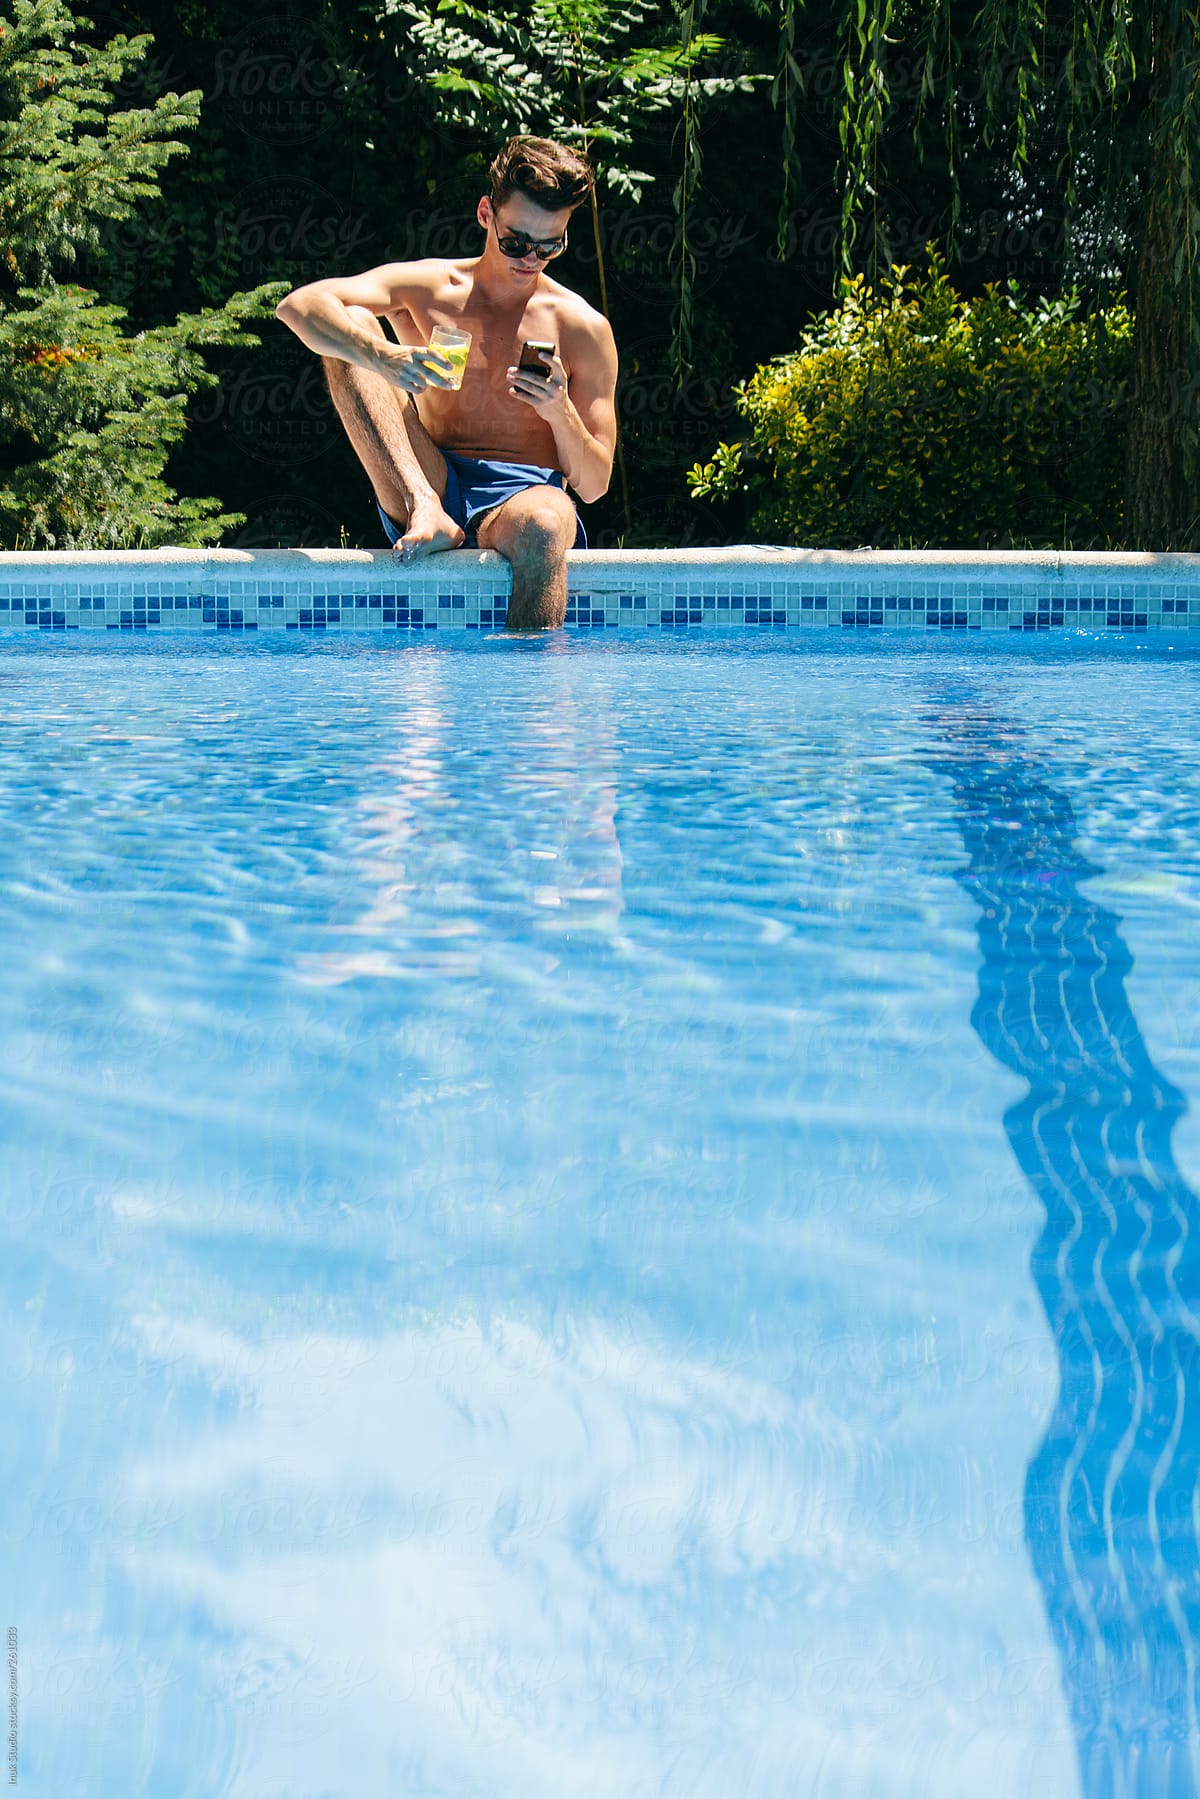 Young Man Sitting And Using His Phone In A Pool by Stocksy Contributor Inuk  Studio - Stocksy